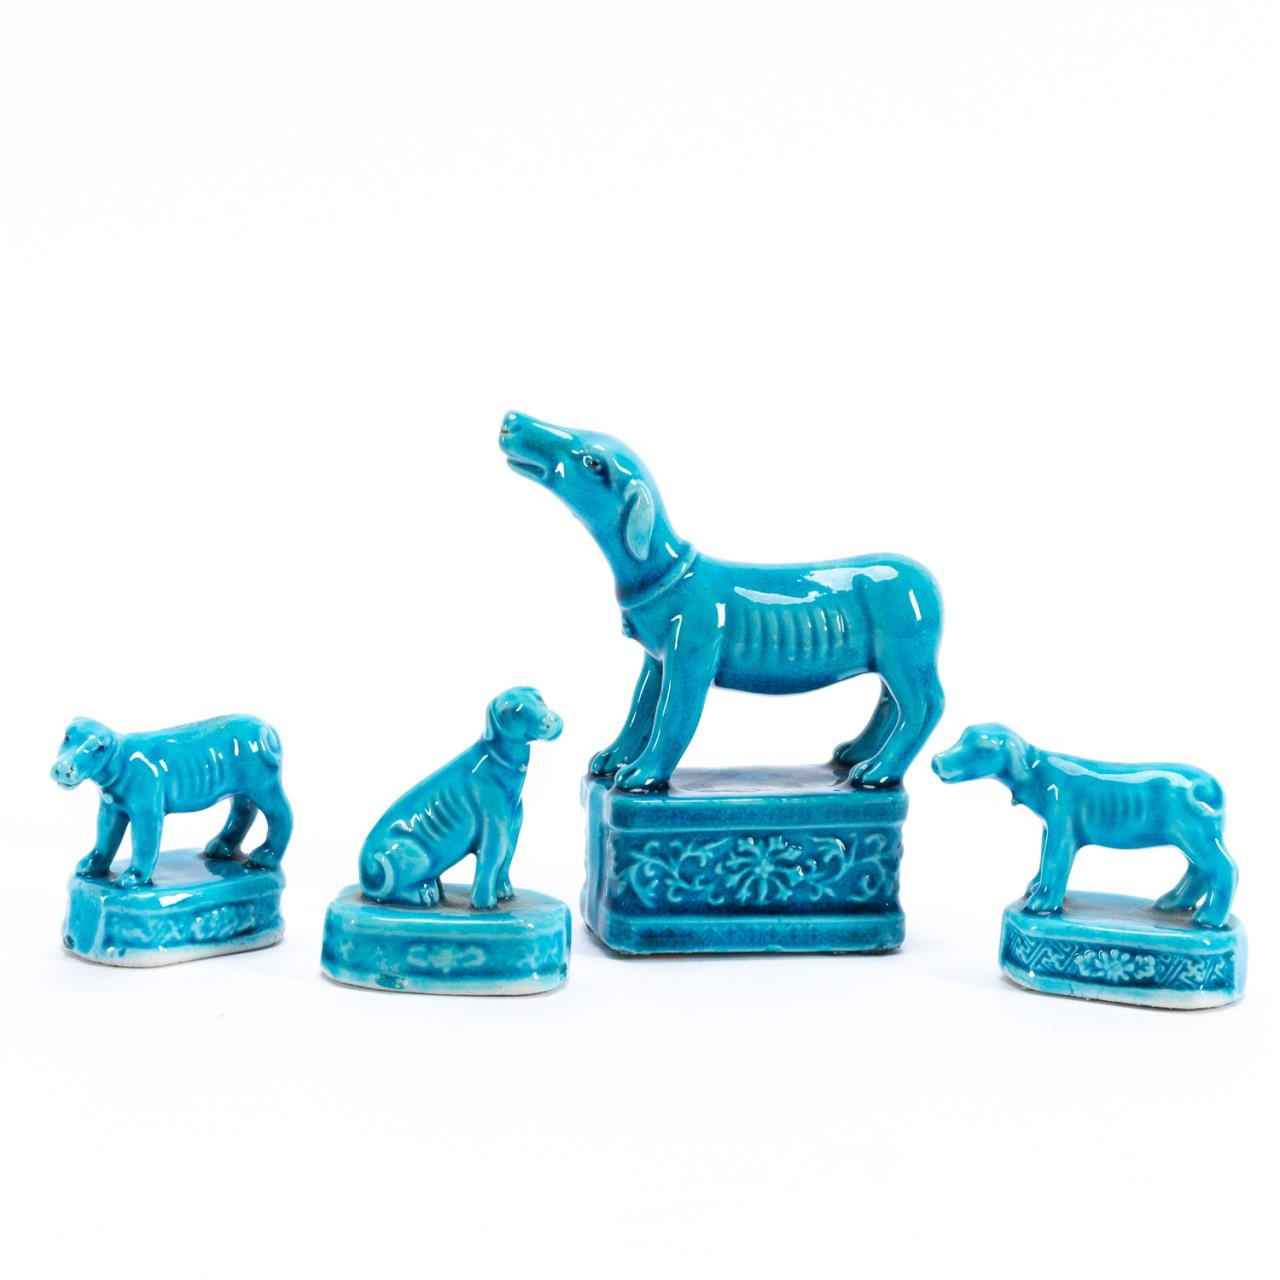 CHINESE GROUP 4 SMALL TURQUOISE 35c1be